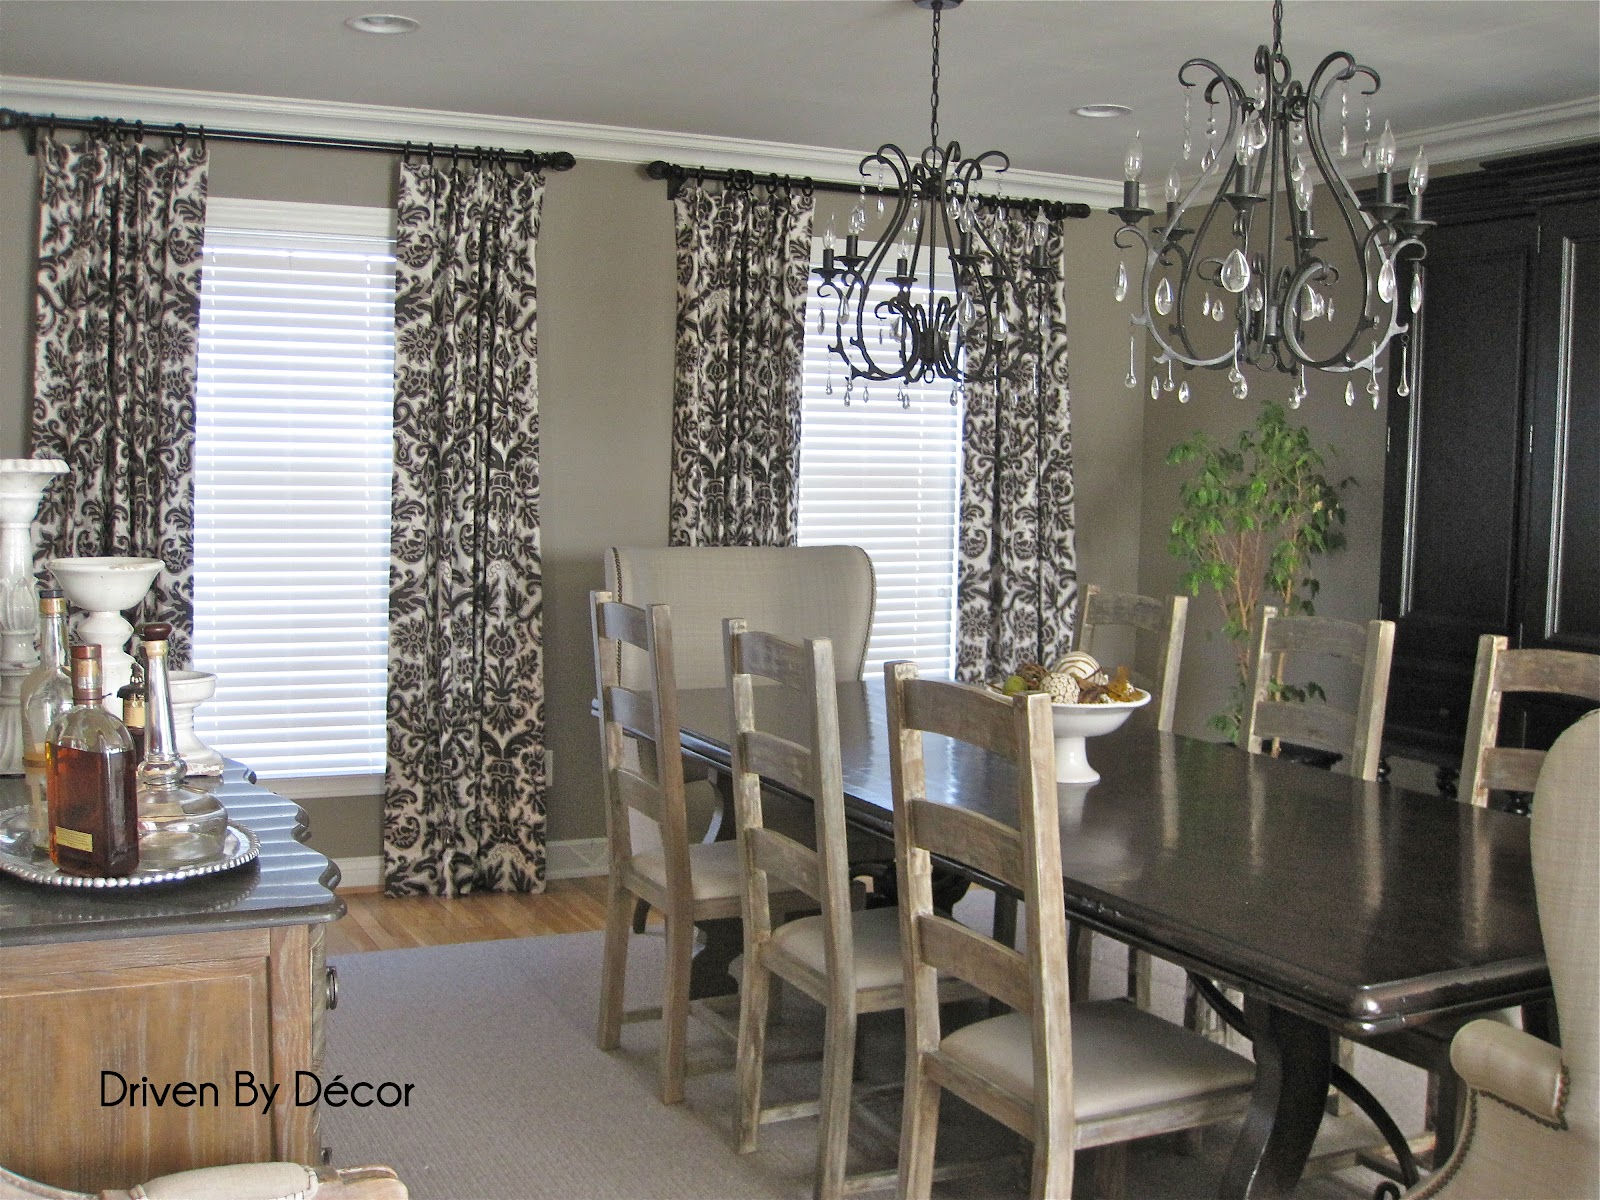 Driven By Décor: Drapery Panels for a Gray Dining Room